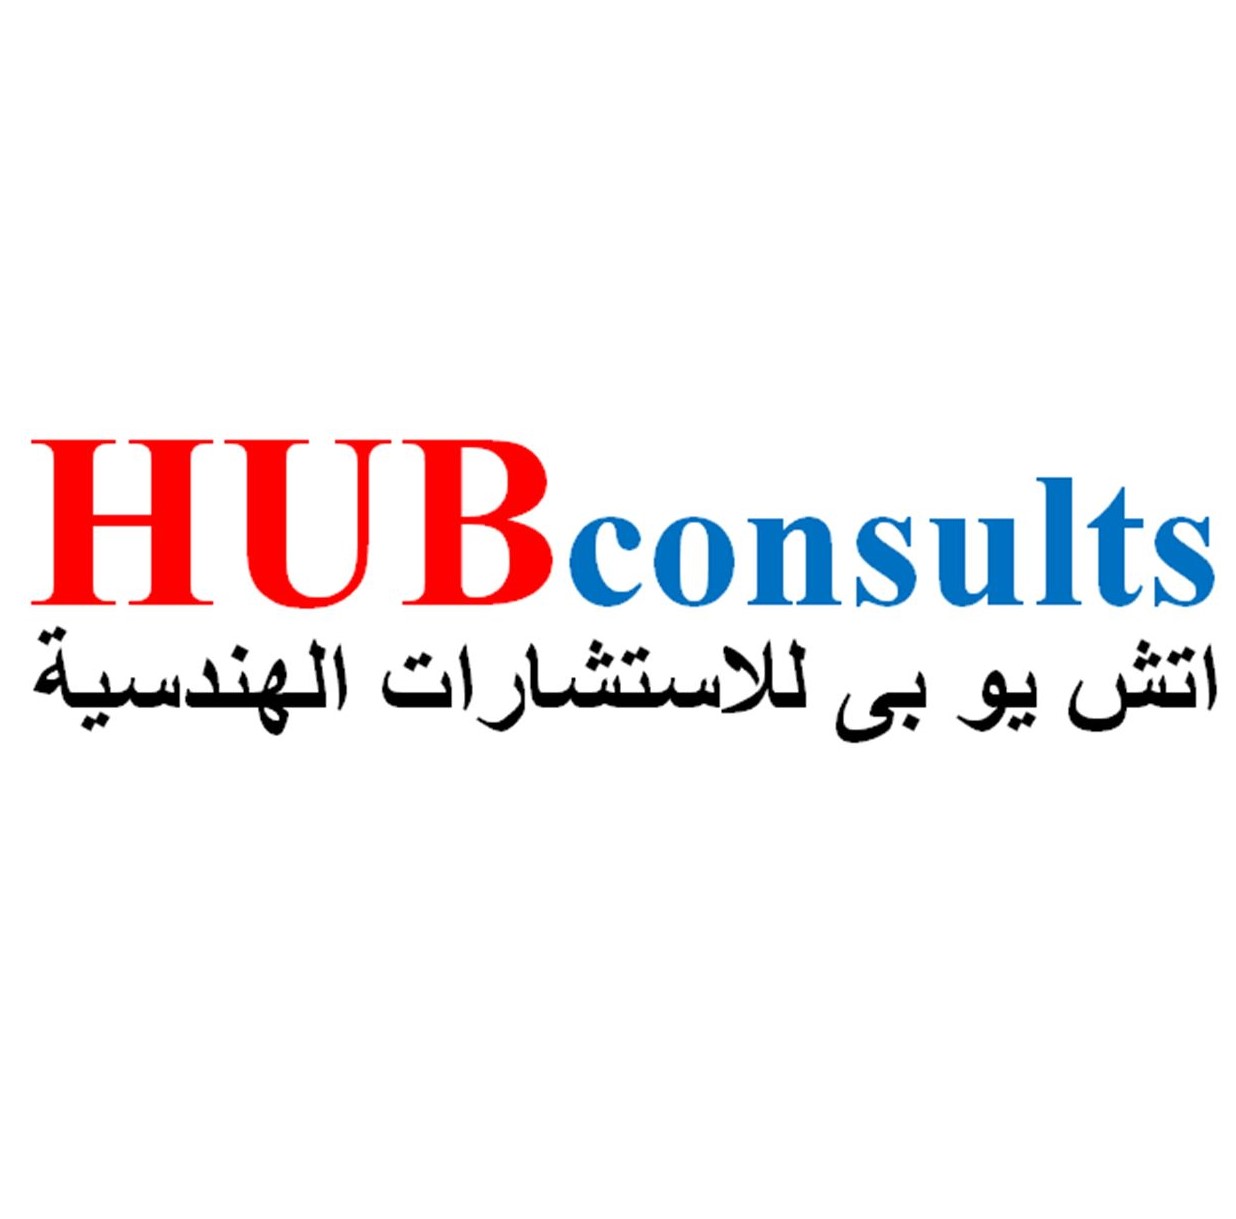 Hubconsults